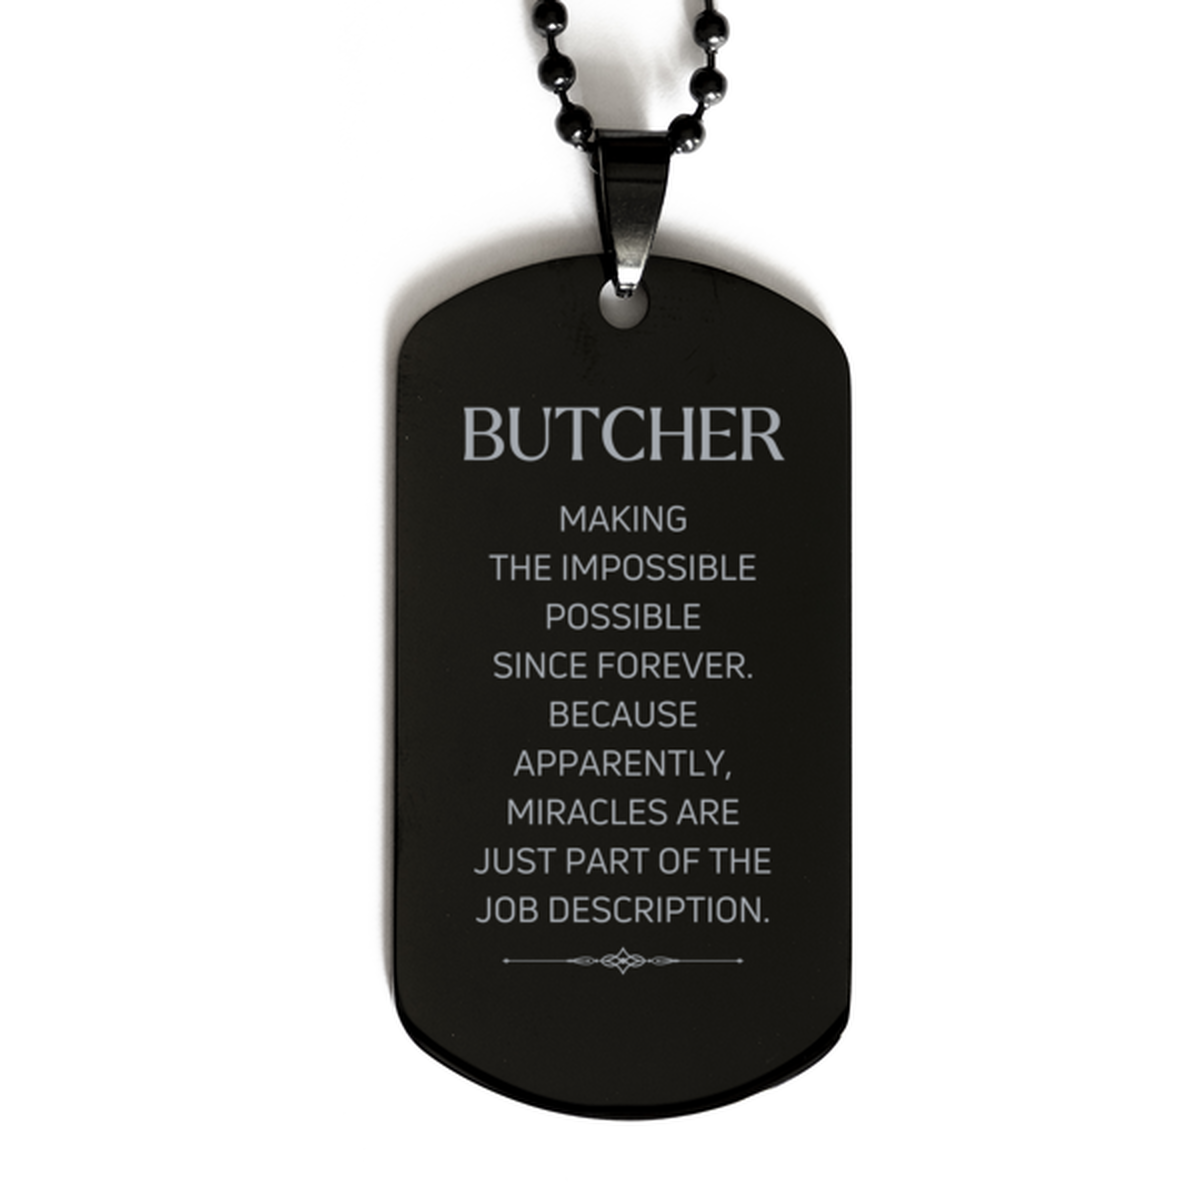 Funny Butcher Gifts, Miracles are just part of the job description, Inspirational Birthday Black Dog Tag For Butcher, Men, Women, Coworkers, Friends, Boss